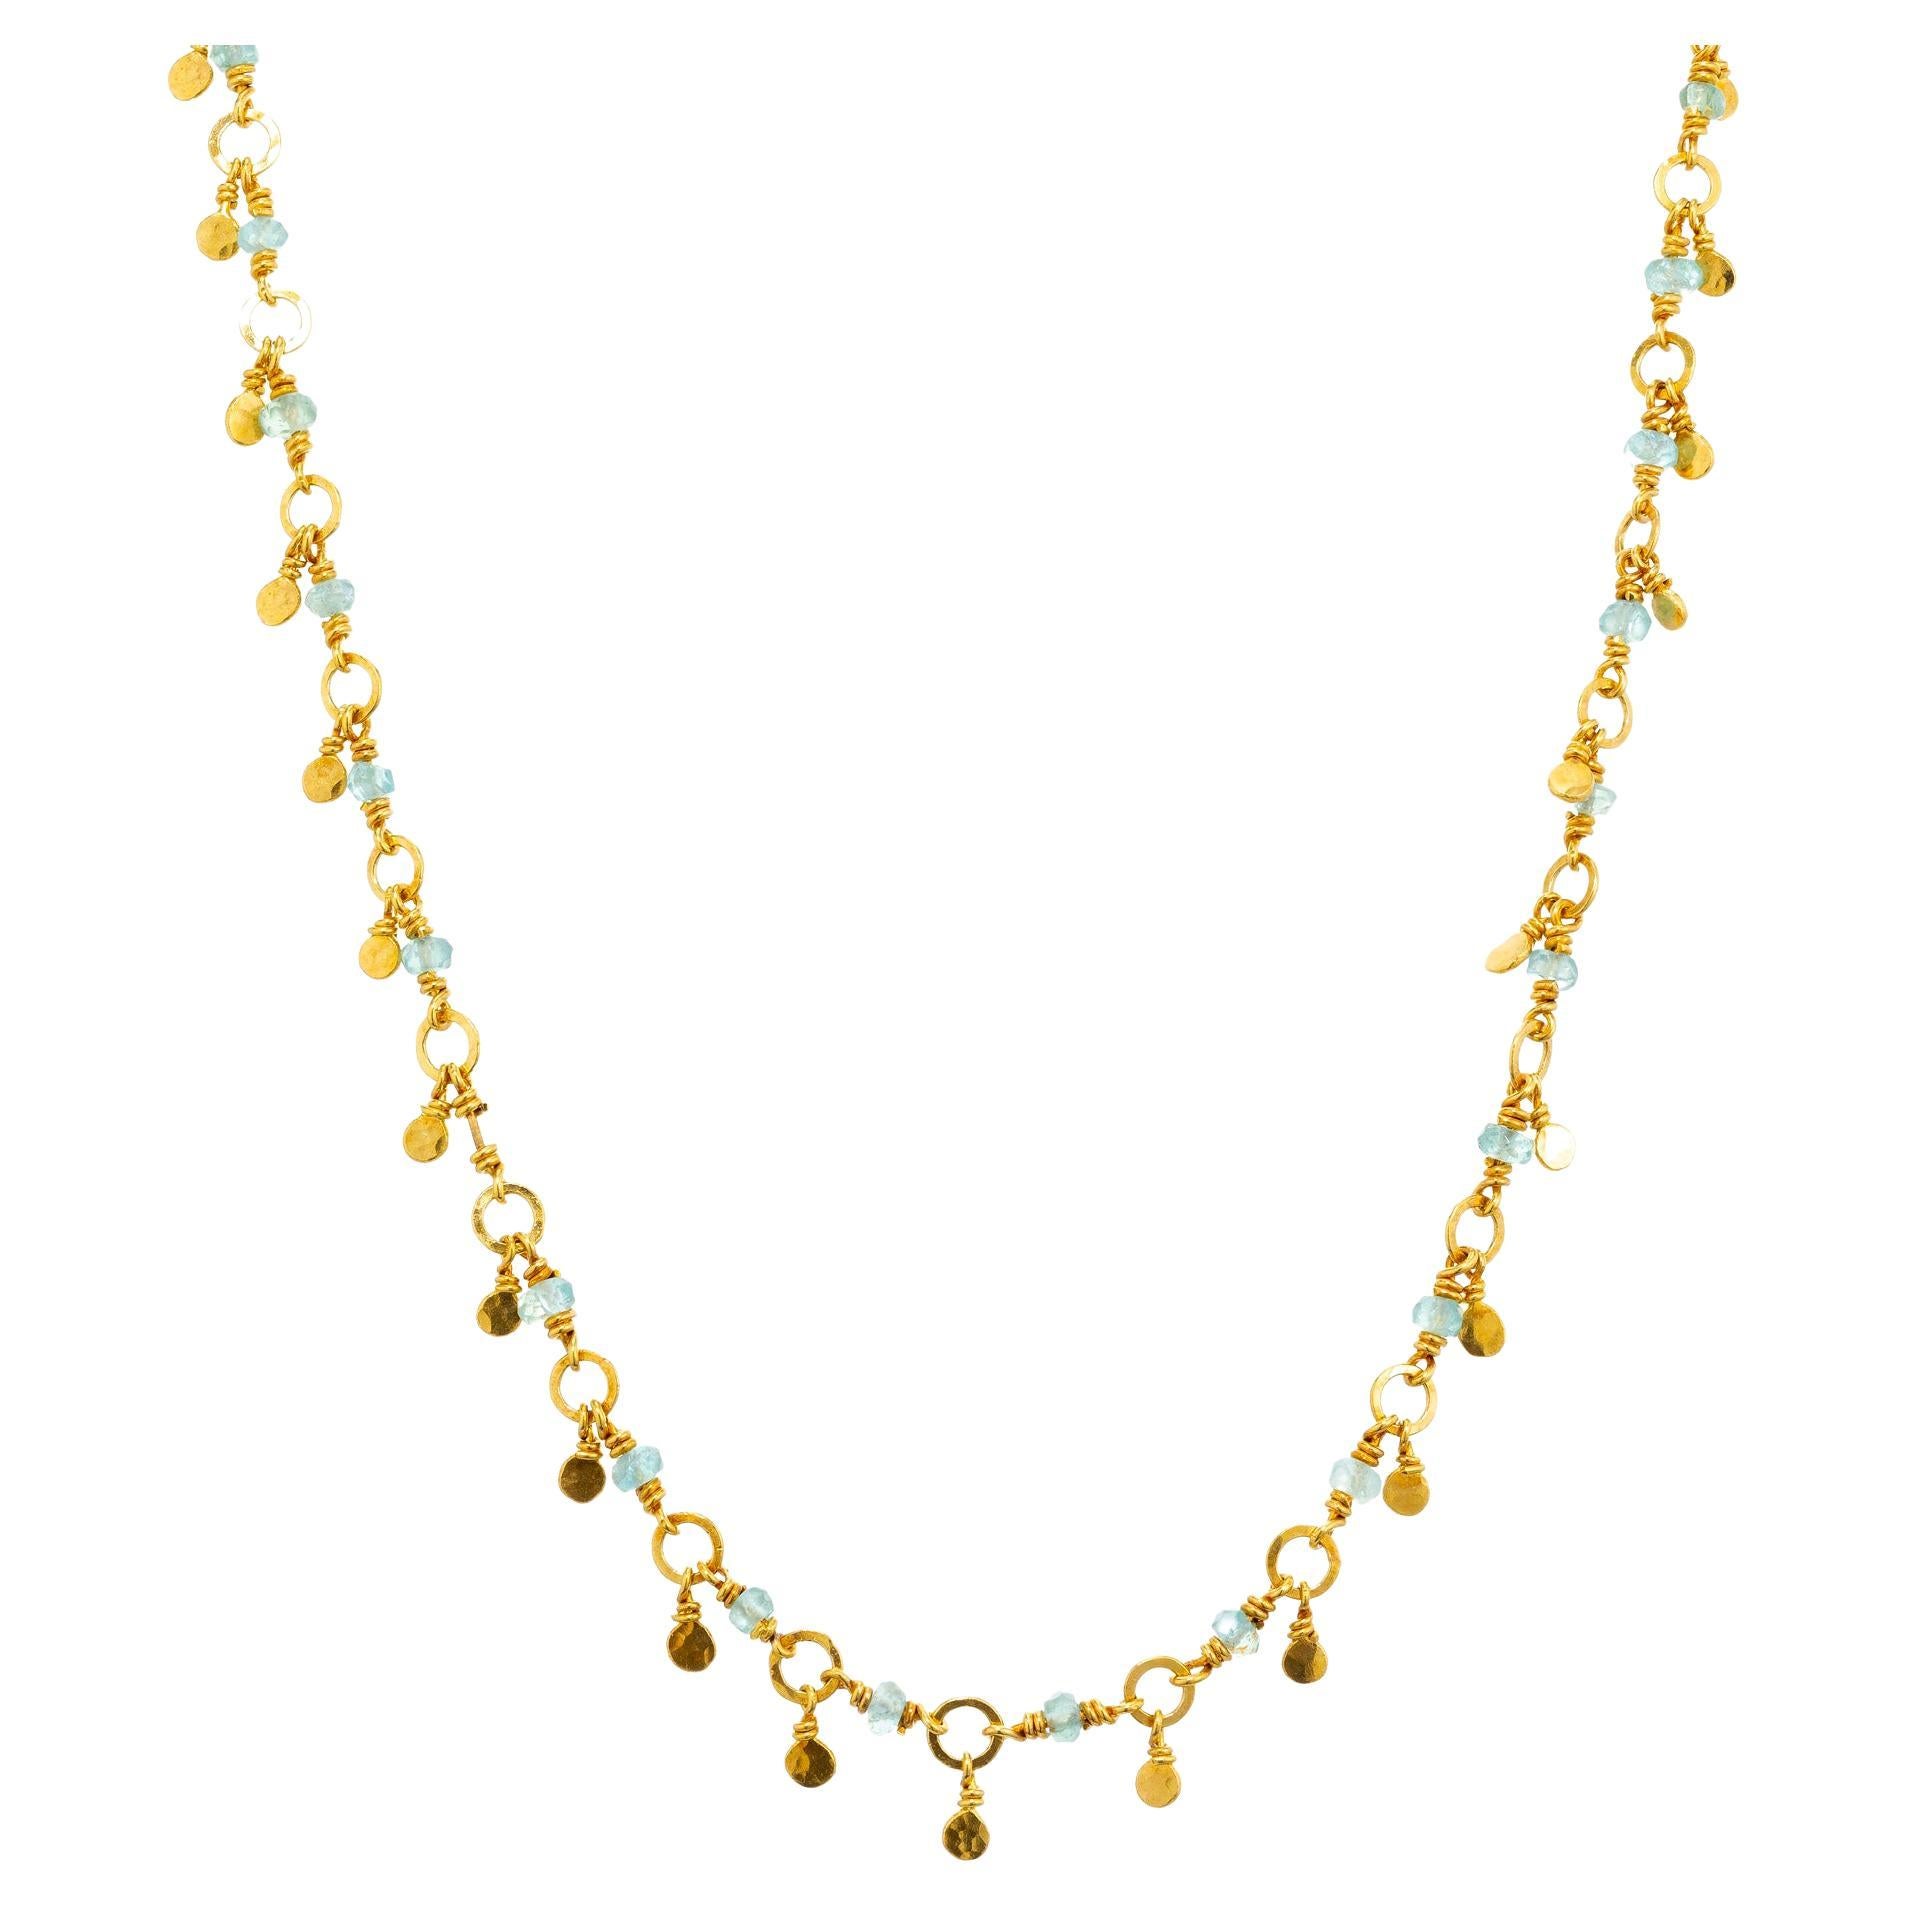 Emerald Rondelle Bead Yellow Gold Rondelle Necklace